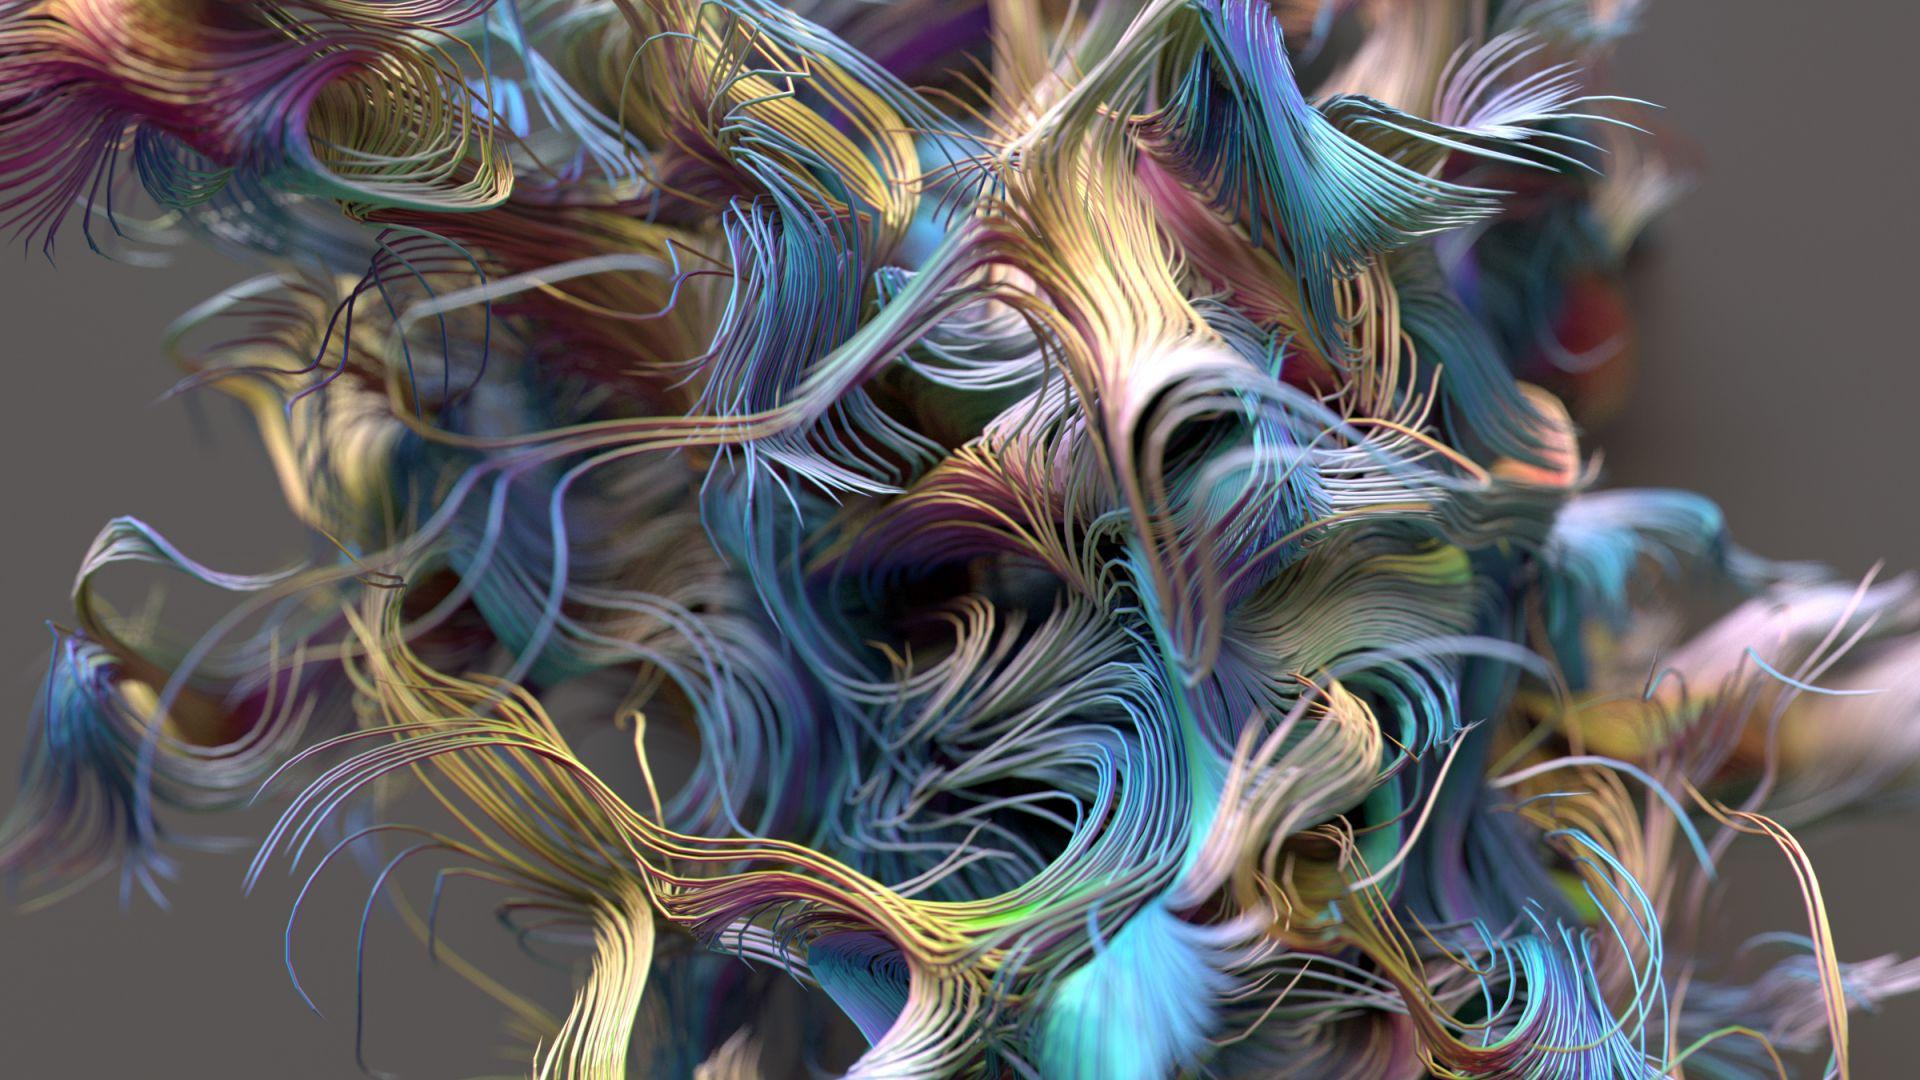 Abstract 4k Wallpaper & 3D Graphics in HD, 8k resolution